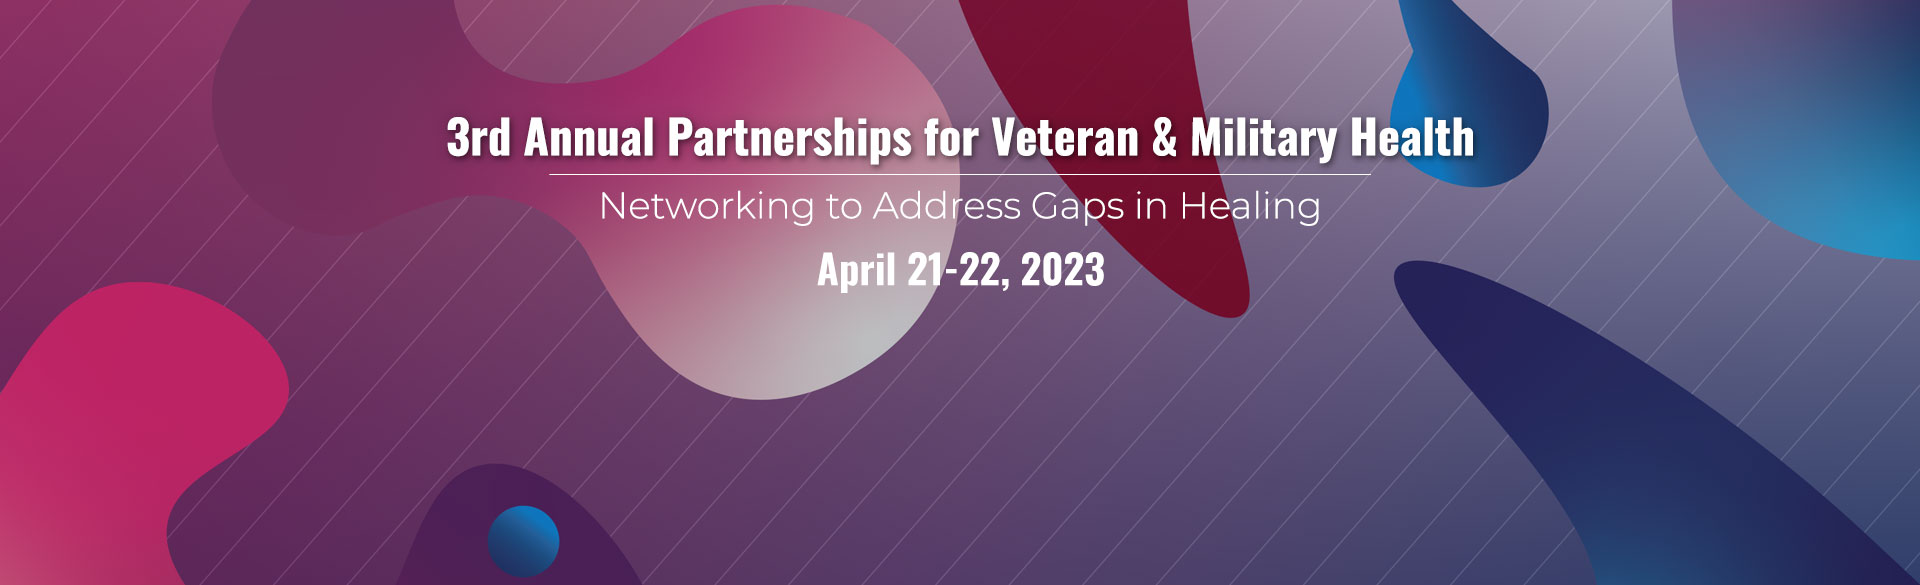 Third Annual Partnerships for Veteran and Military Health conference